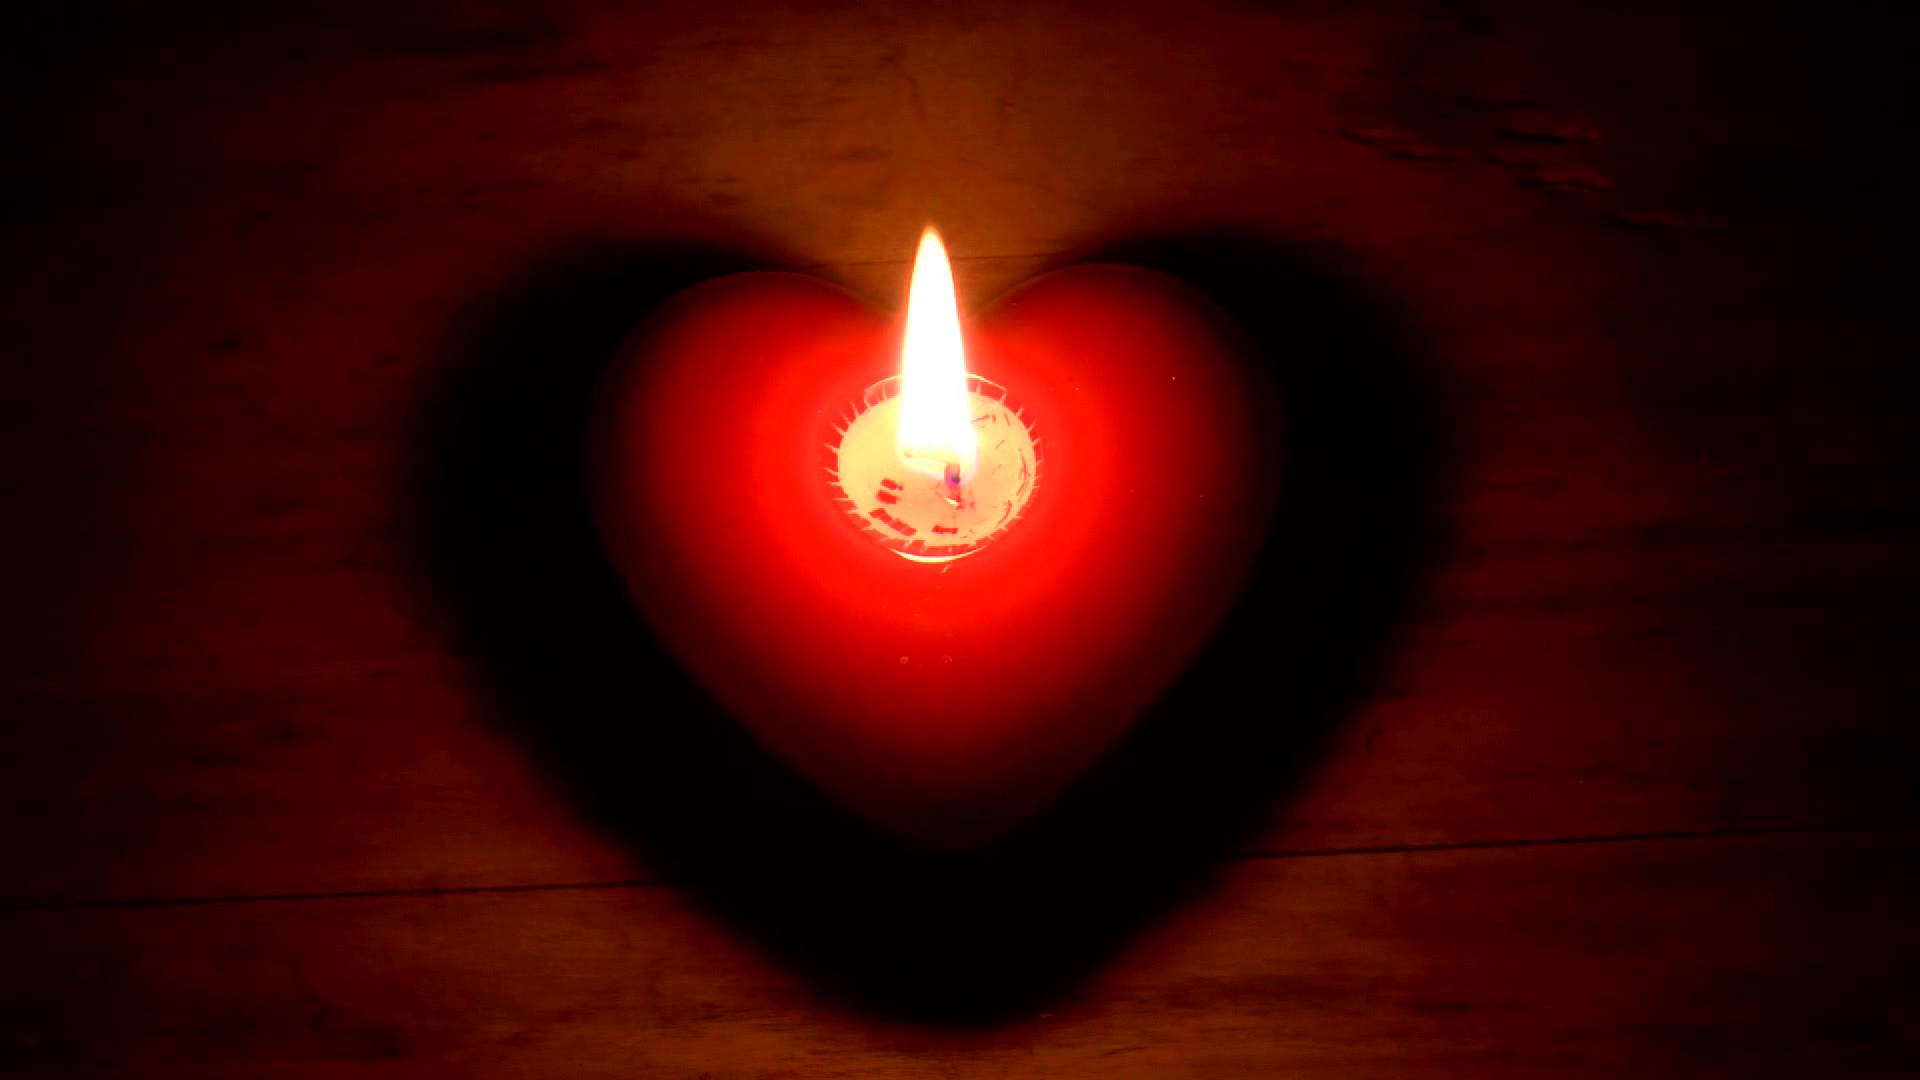 ❤ Romantic Candlelight Ambience for Valentine's Day with Heart ...